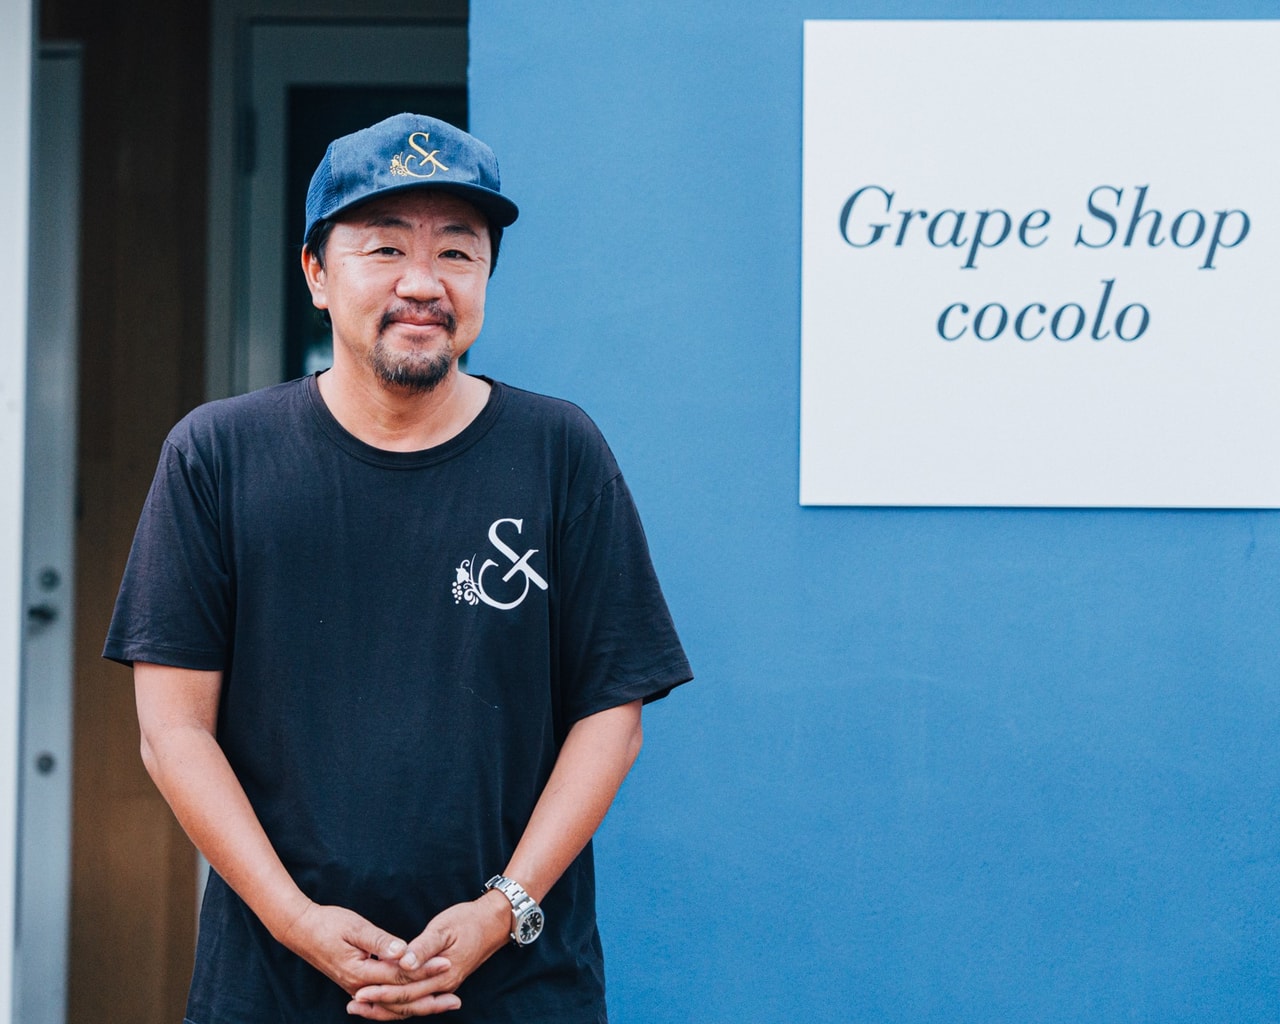 Grapes grown by farmers for farmers. Shimura Grape Research Institute” Connecting “Soil for the Future